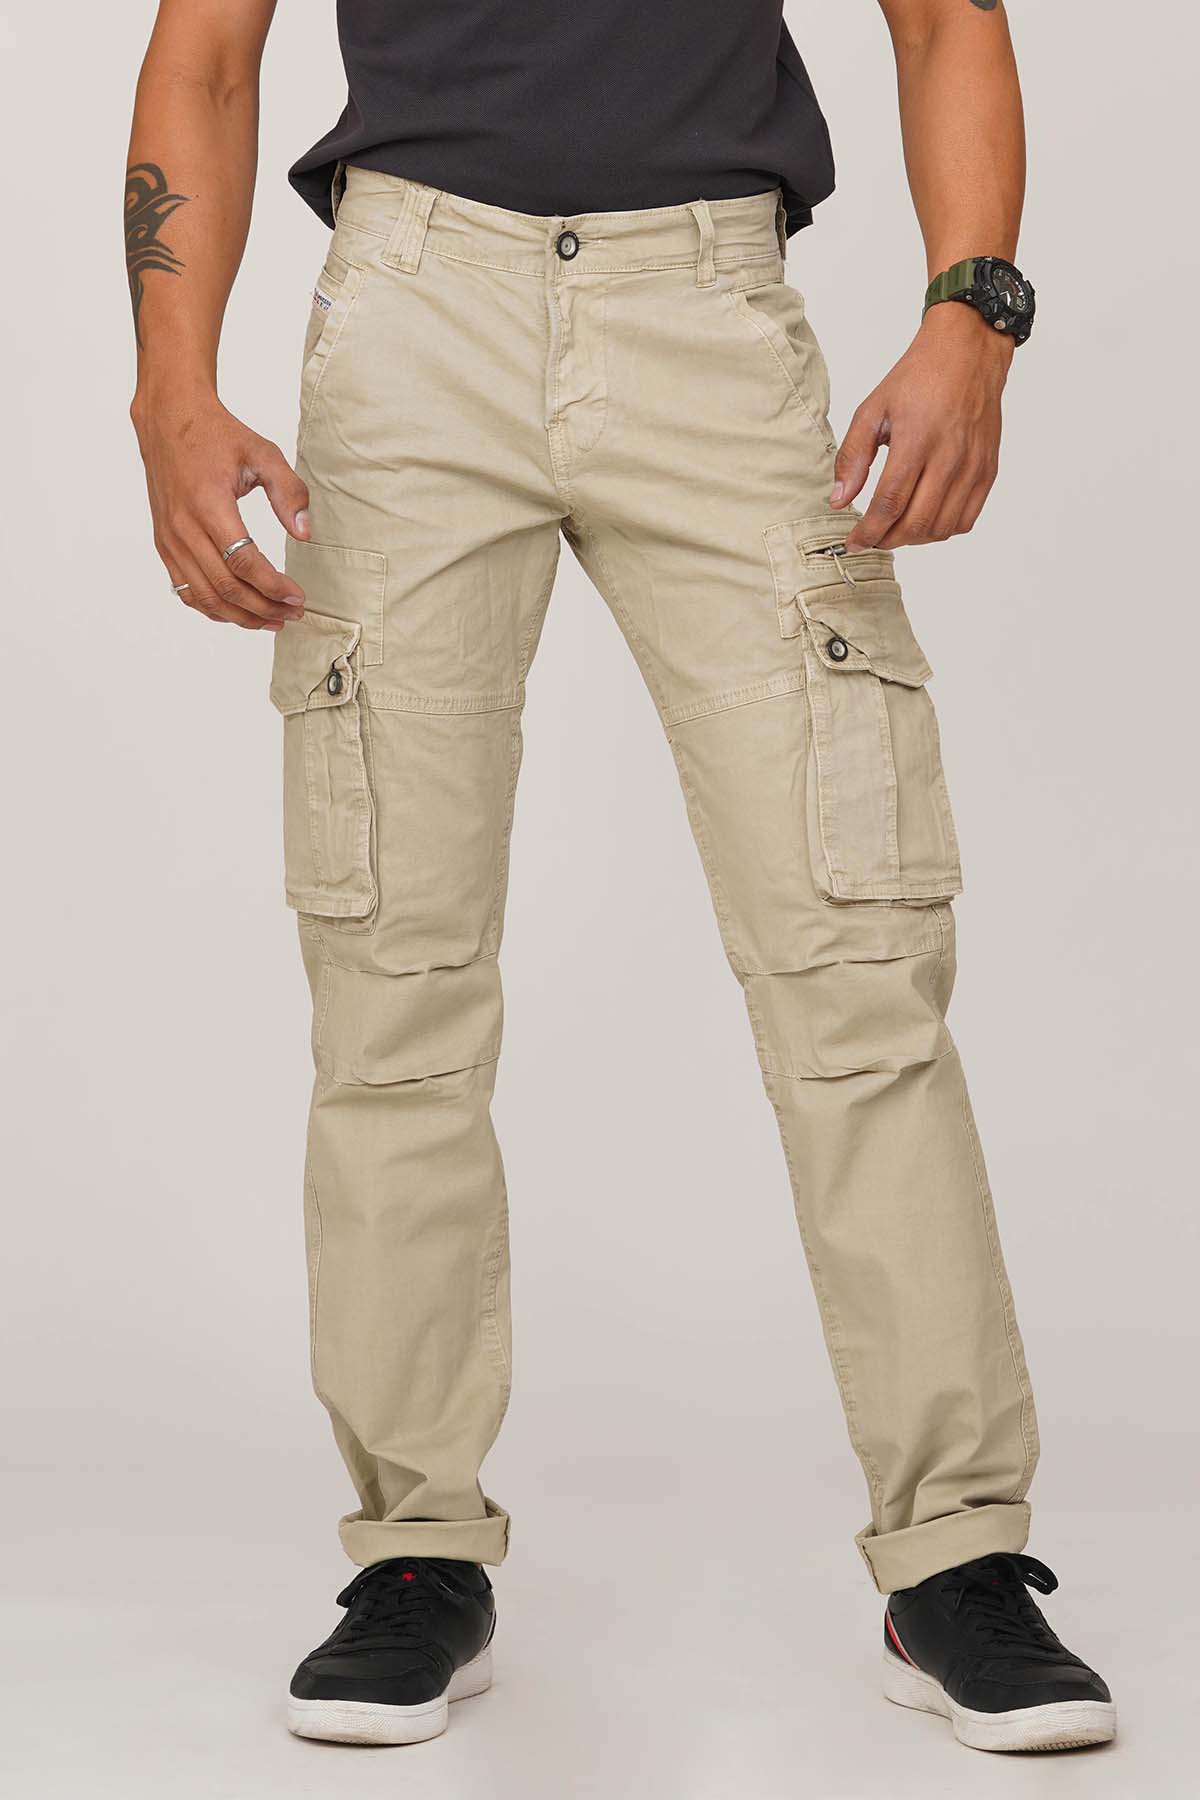 Buy Urban Legends 6 Pocket Relaxed and Regular Fit Cotton Cargo Jogger Pants  for Men Design for Casual and Sporty Looks Off WHITE28 at Amazonin